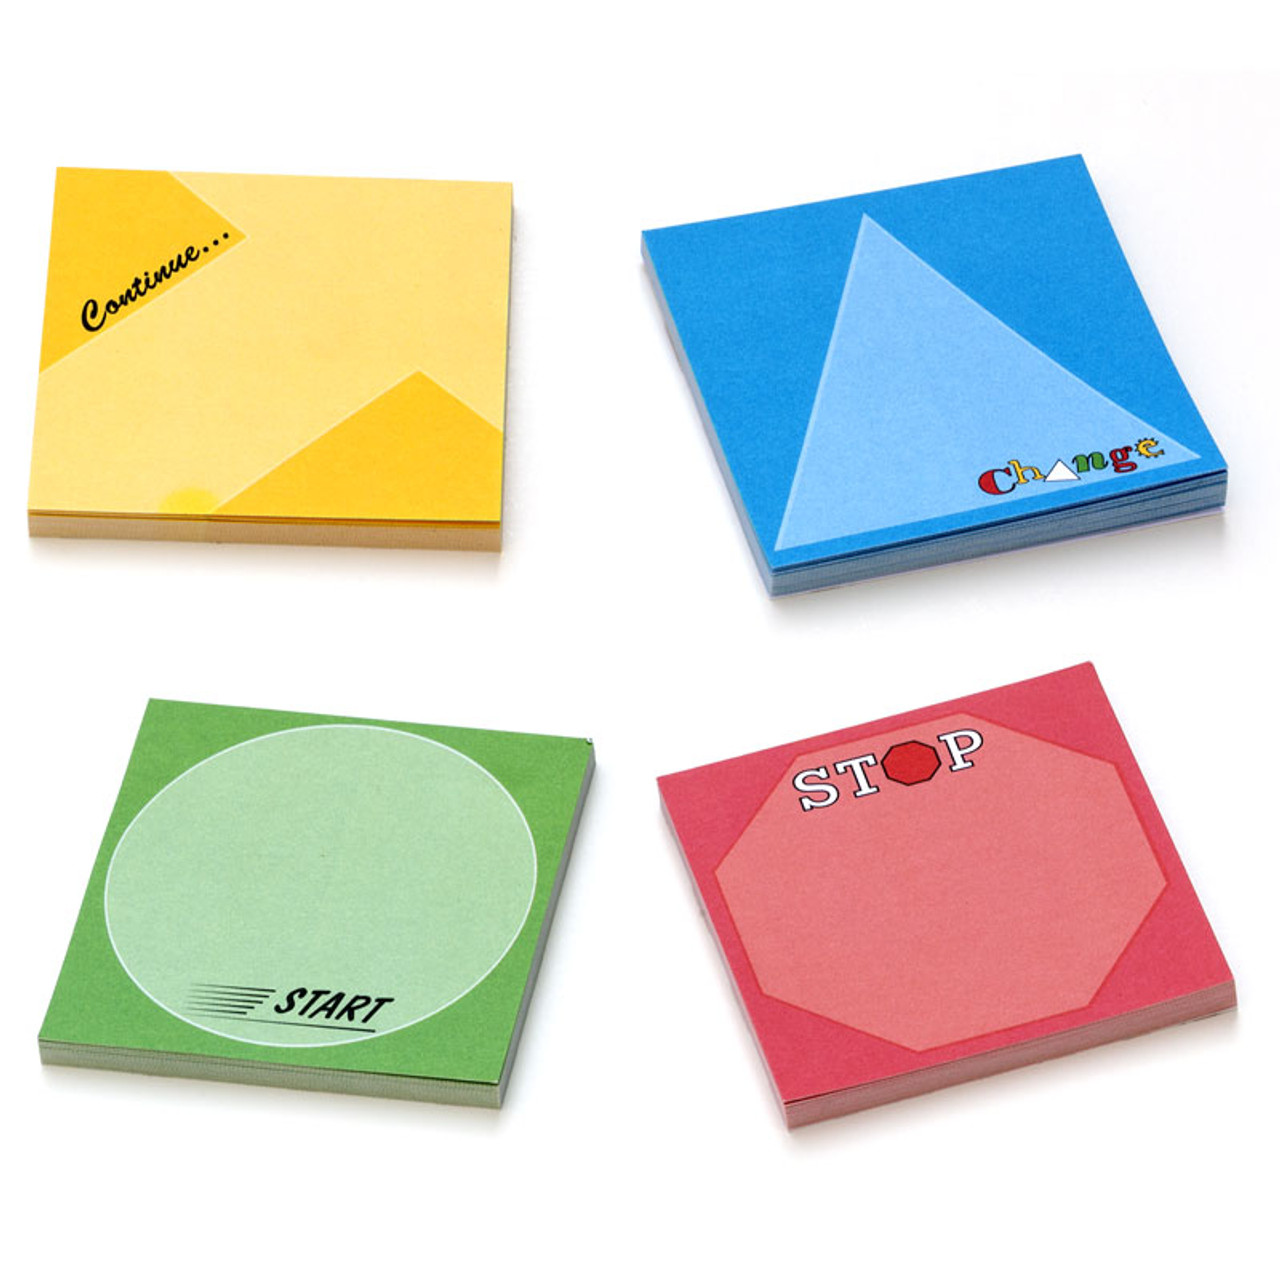 Start/Stop/Continue/Change Sticky Notes, Set of 20